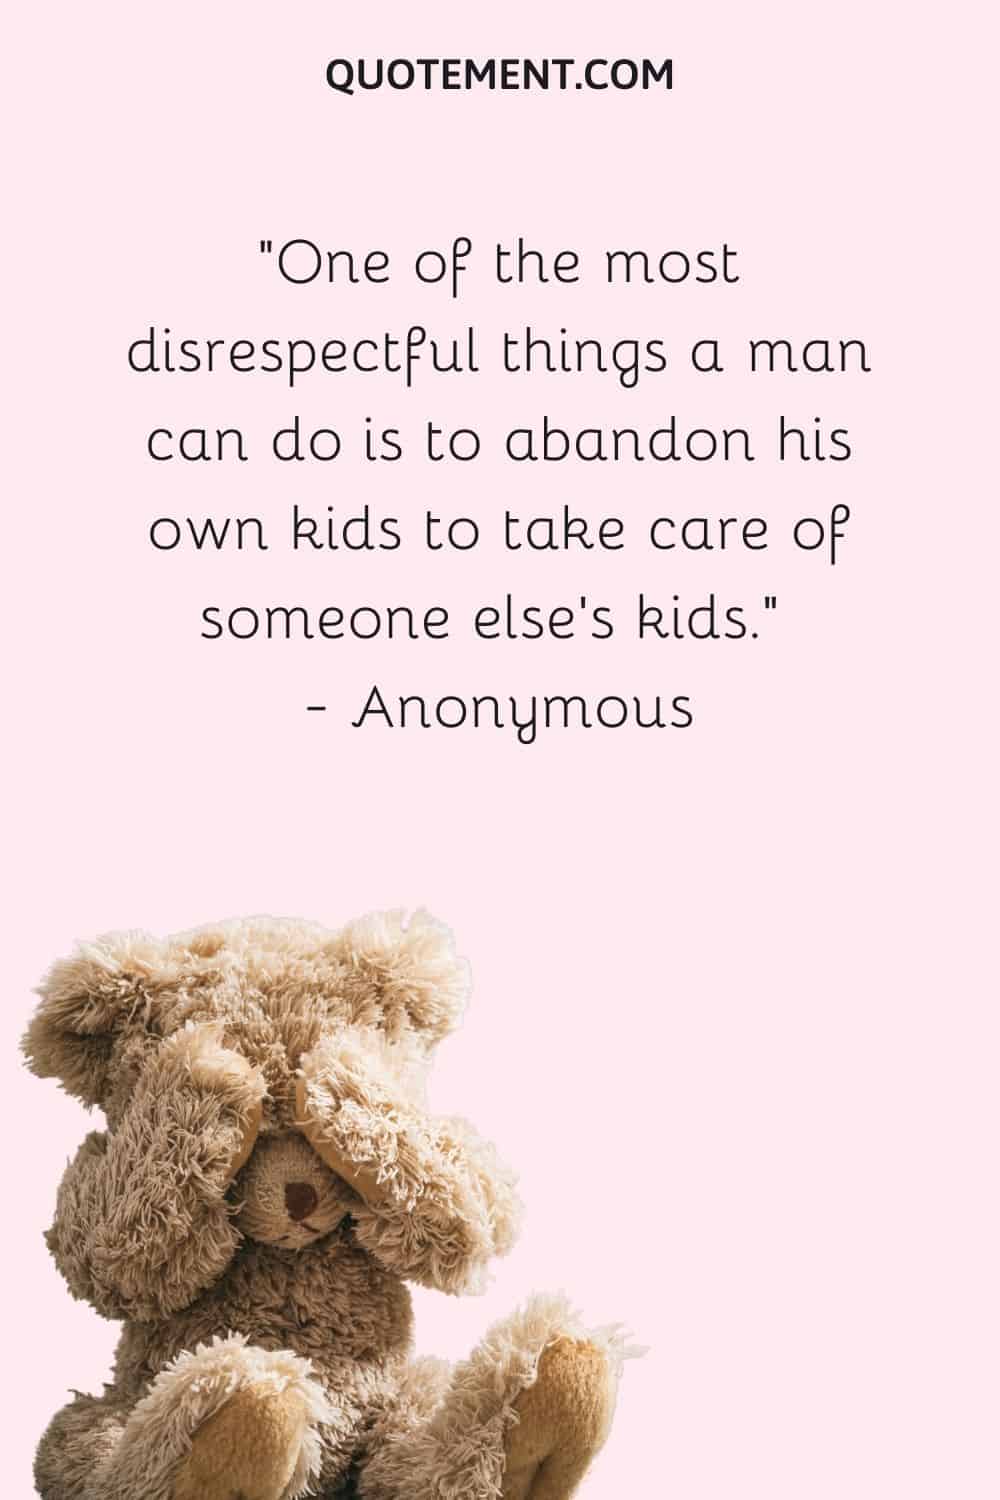 One of the most disrespectful things a man can do is to abandon his own kids to take care of someone else's kids. — Anonymous